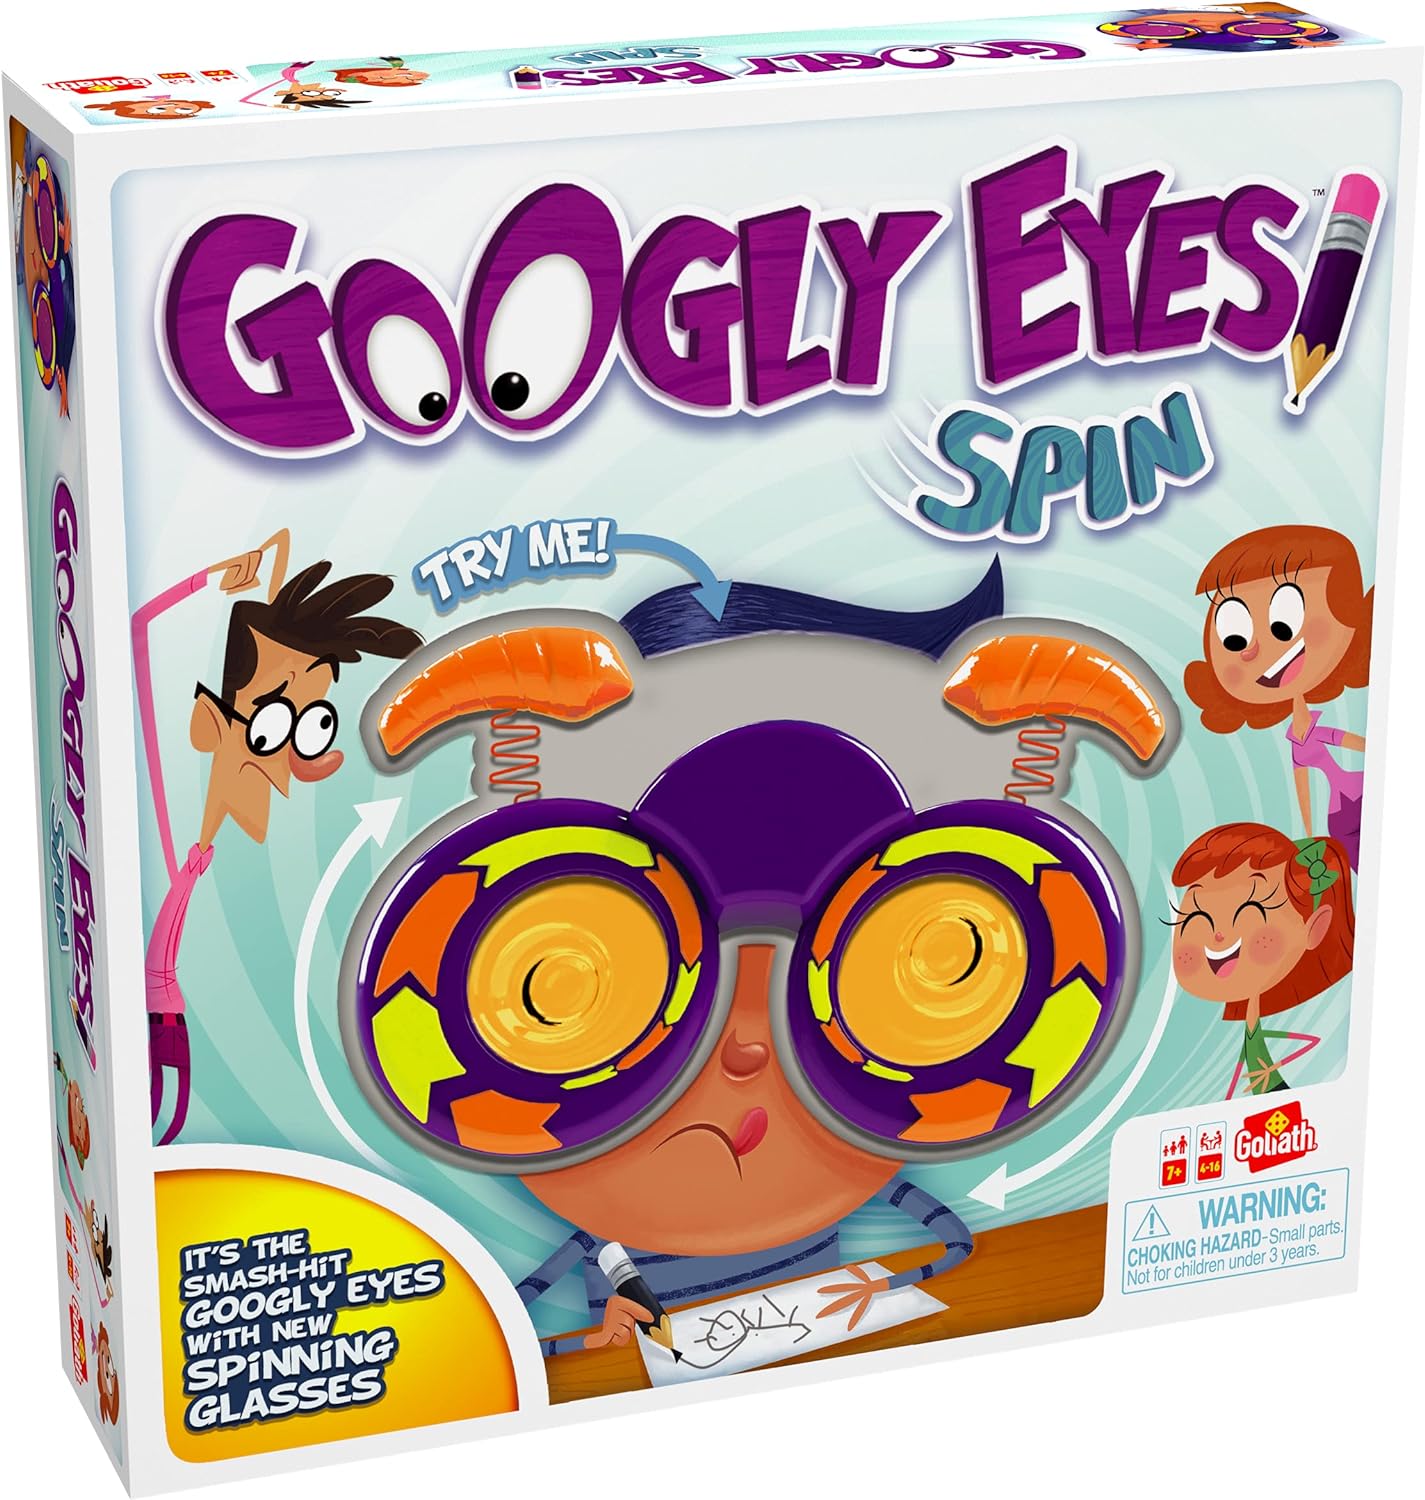 Googly Eyes Spin - The Classic Googly Eyes Family Drawing Game with Crazy, Vision-Altering Spinning Glasses by Goliath, Multi Color